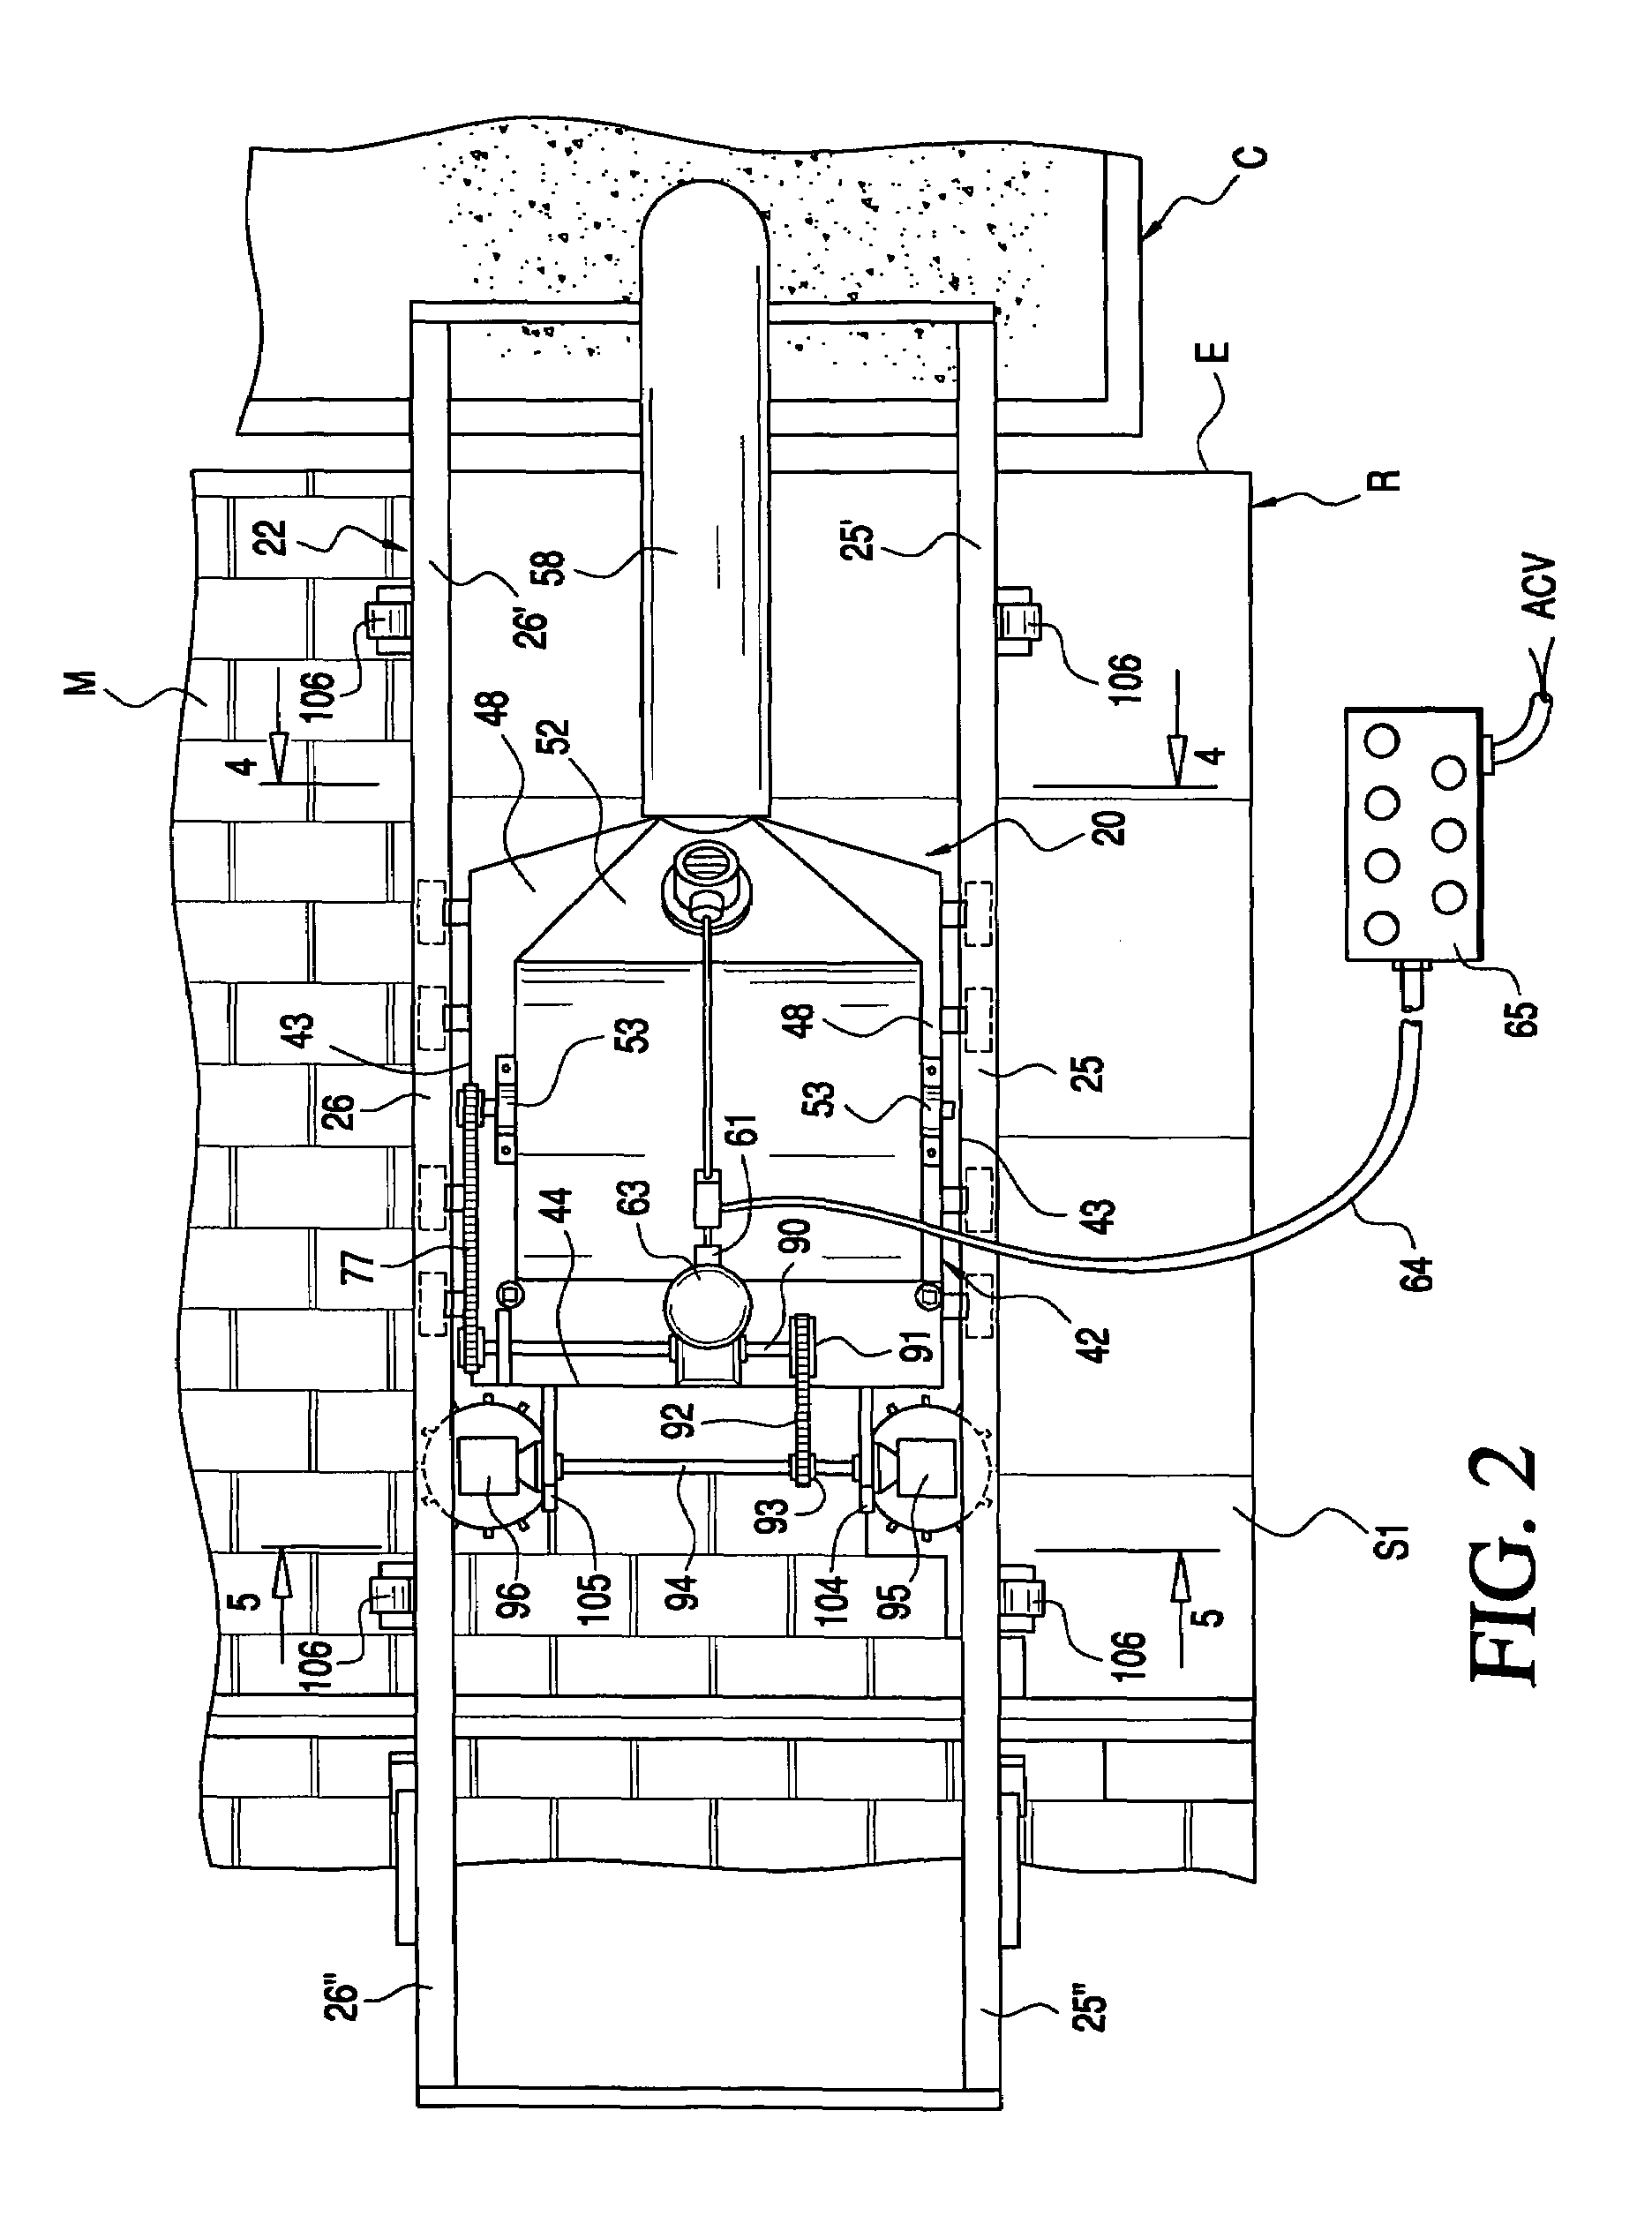 Automated roofing material removal machine and method